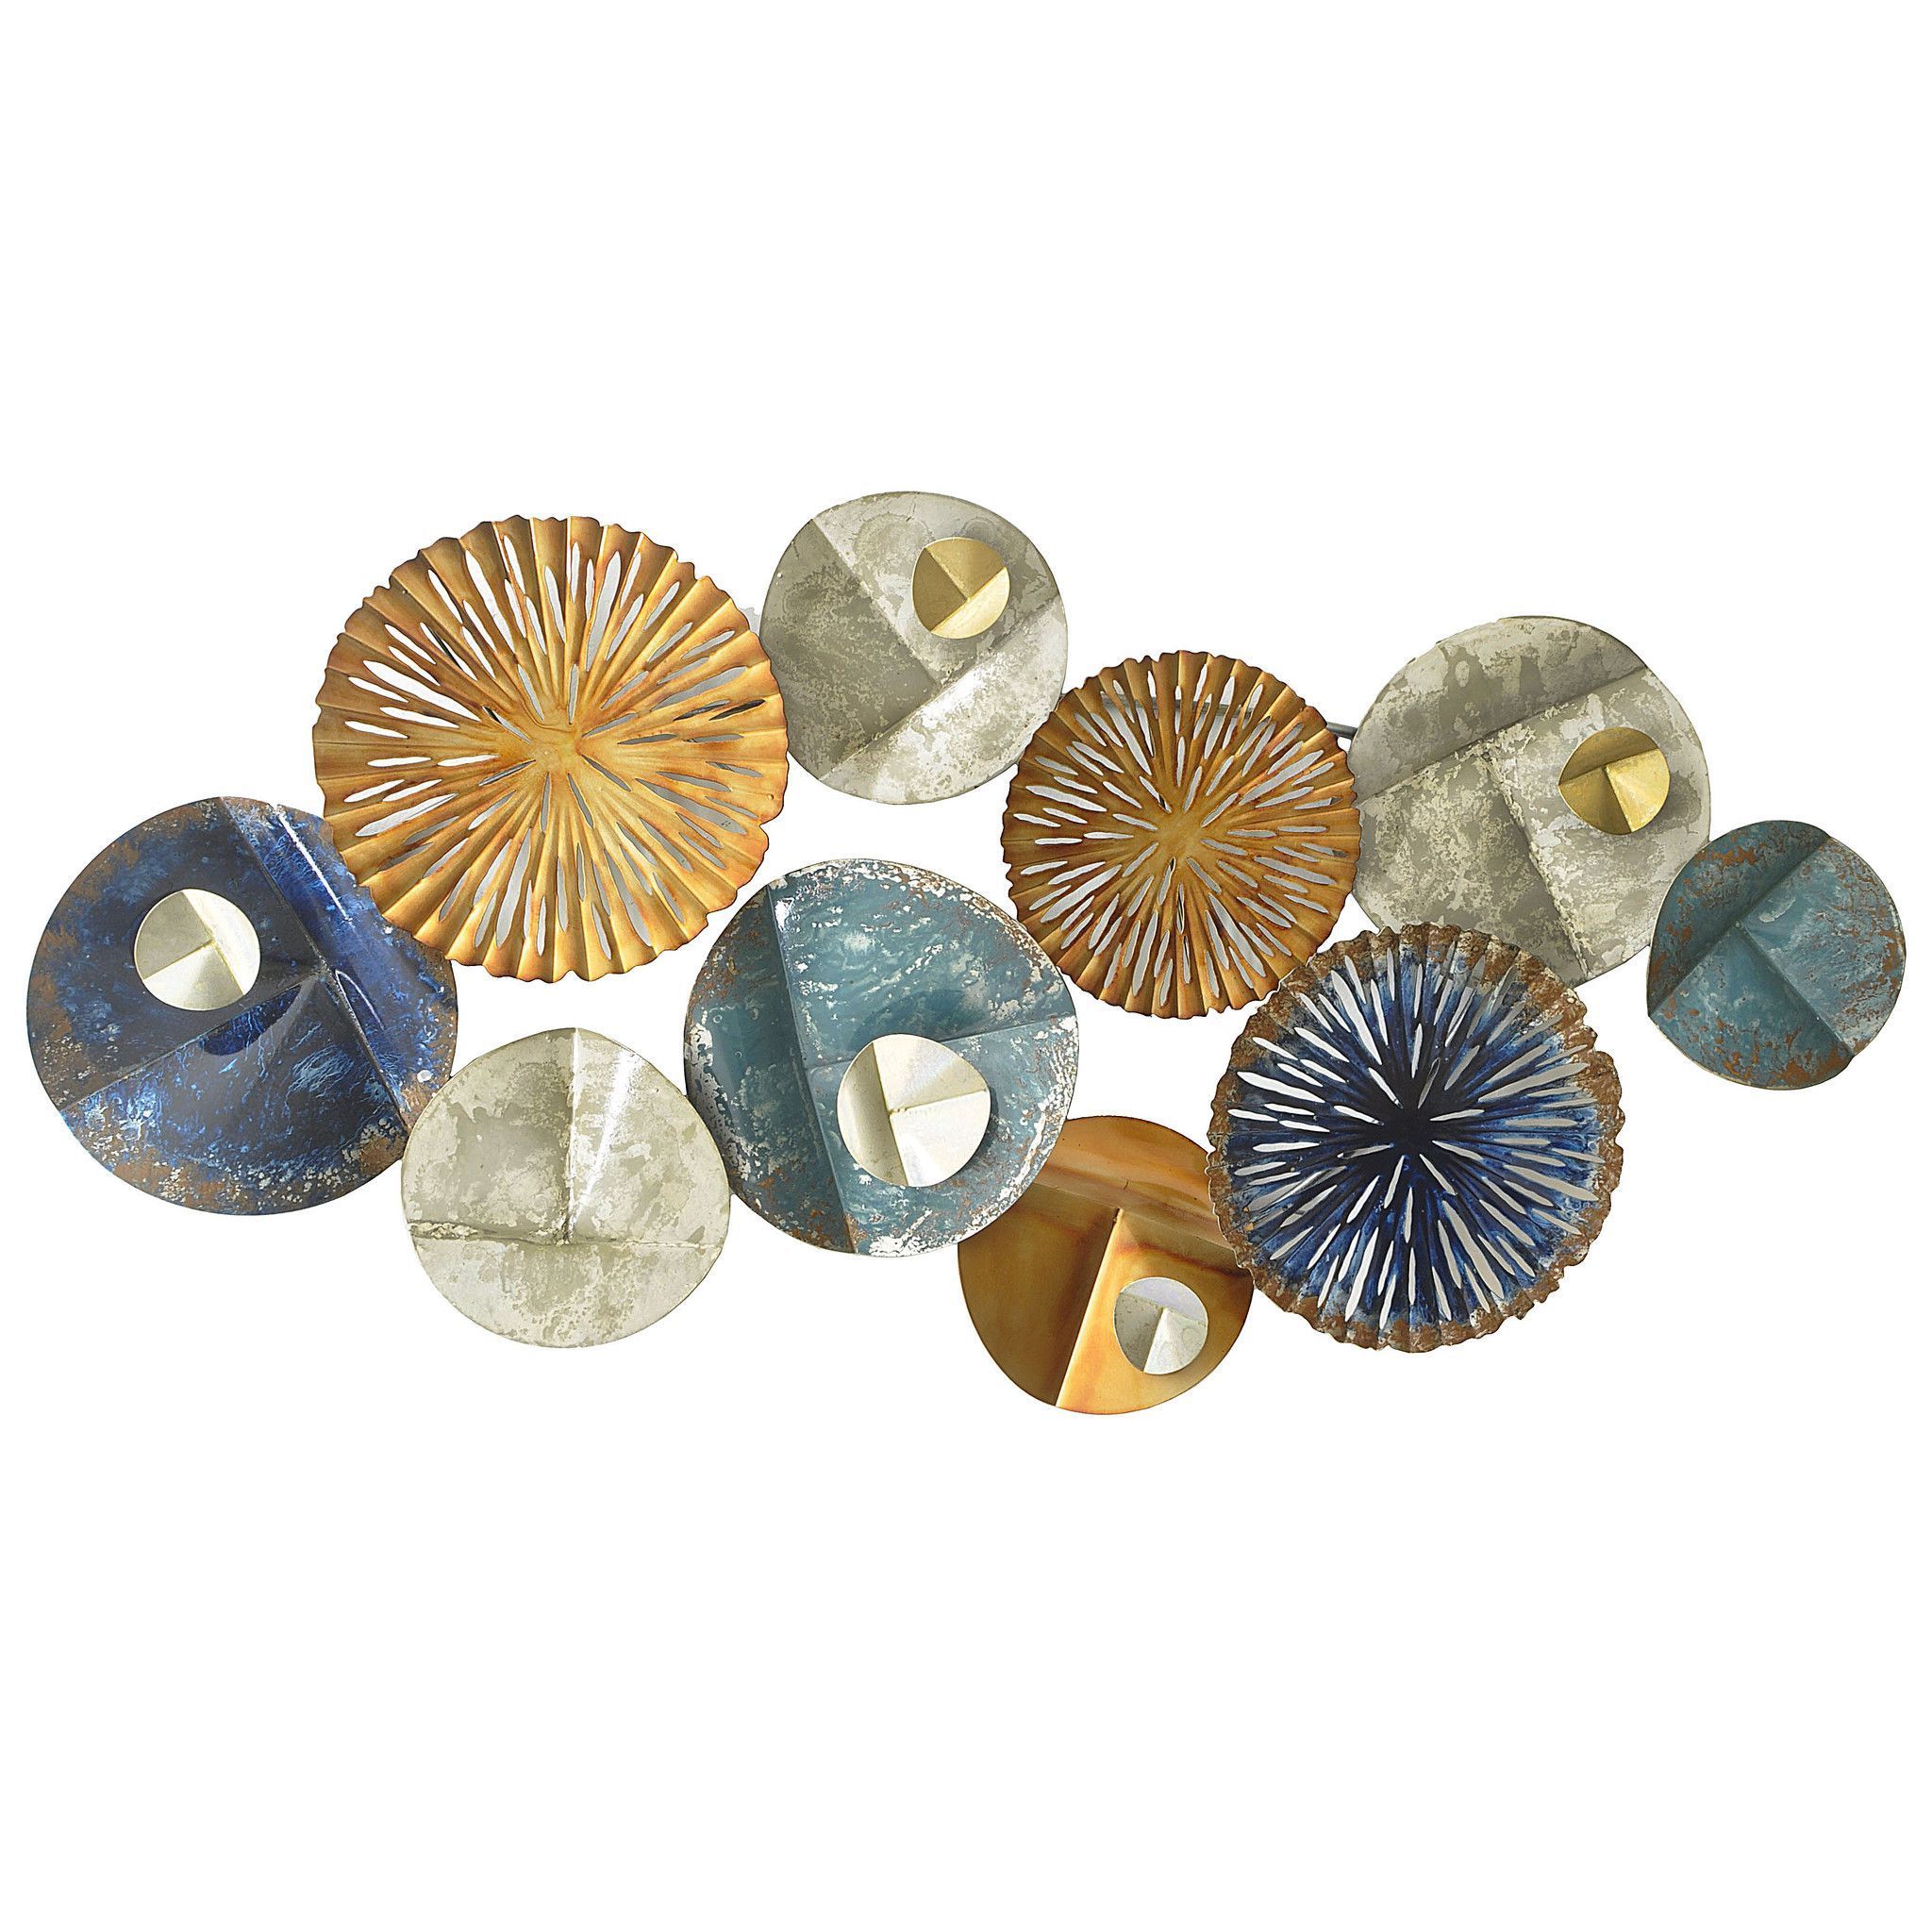 Three Hands Abstract Circles Metal Wall Decor In Neutral Color Tones Pertaining To Recent Spiral Circles Metal Wall Art (View 9 of 20)